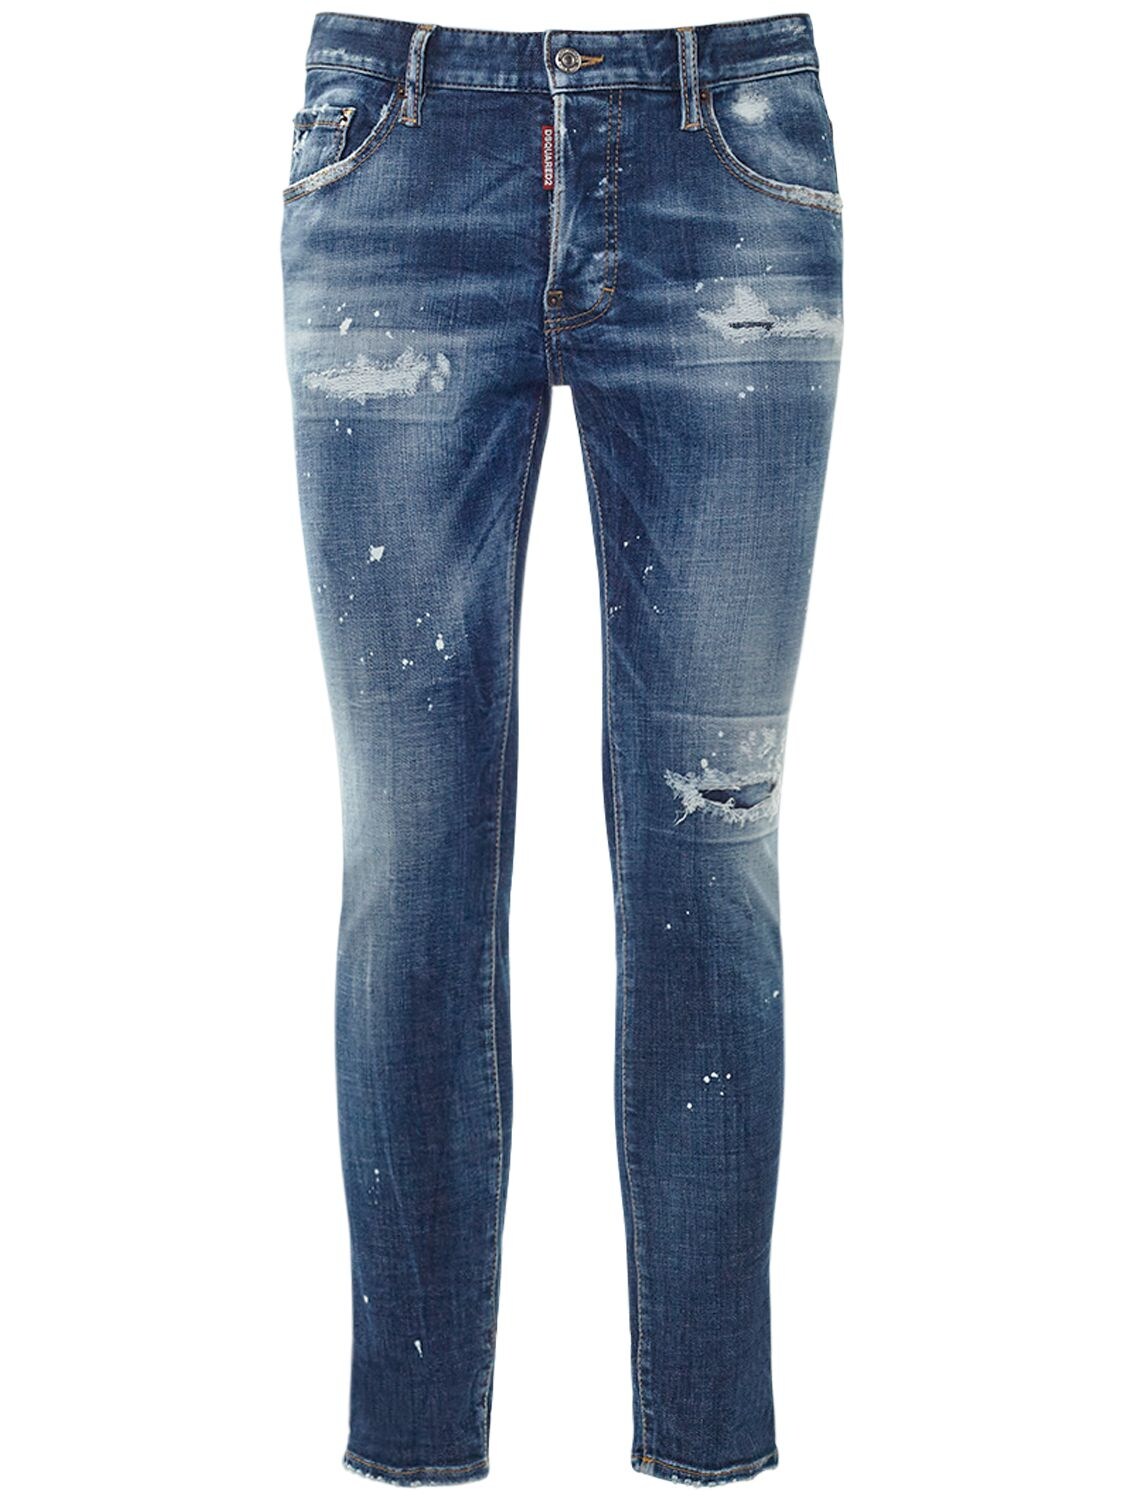 Image of Super Twinky Stretch Cotton Denim Jeans